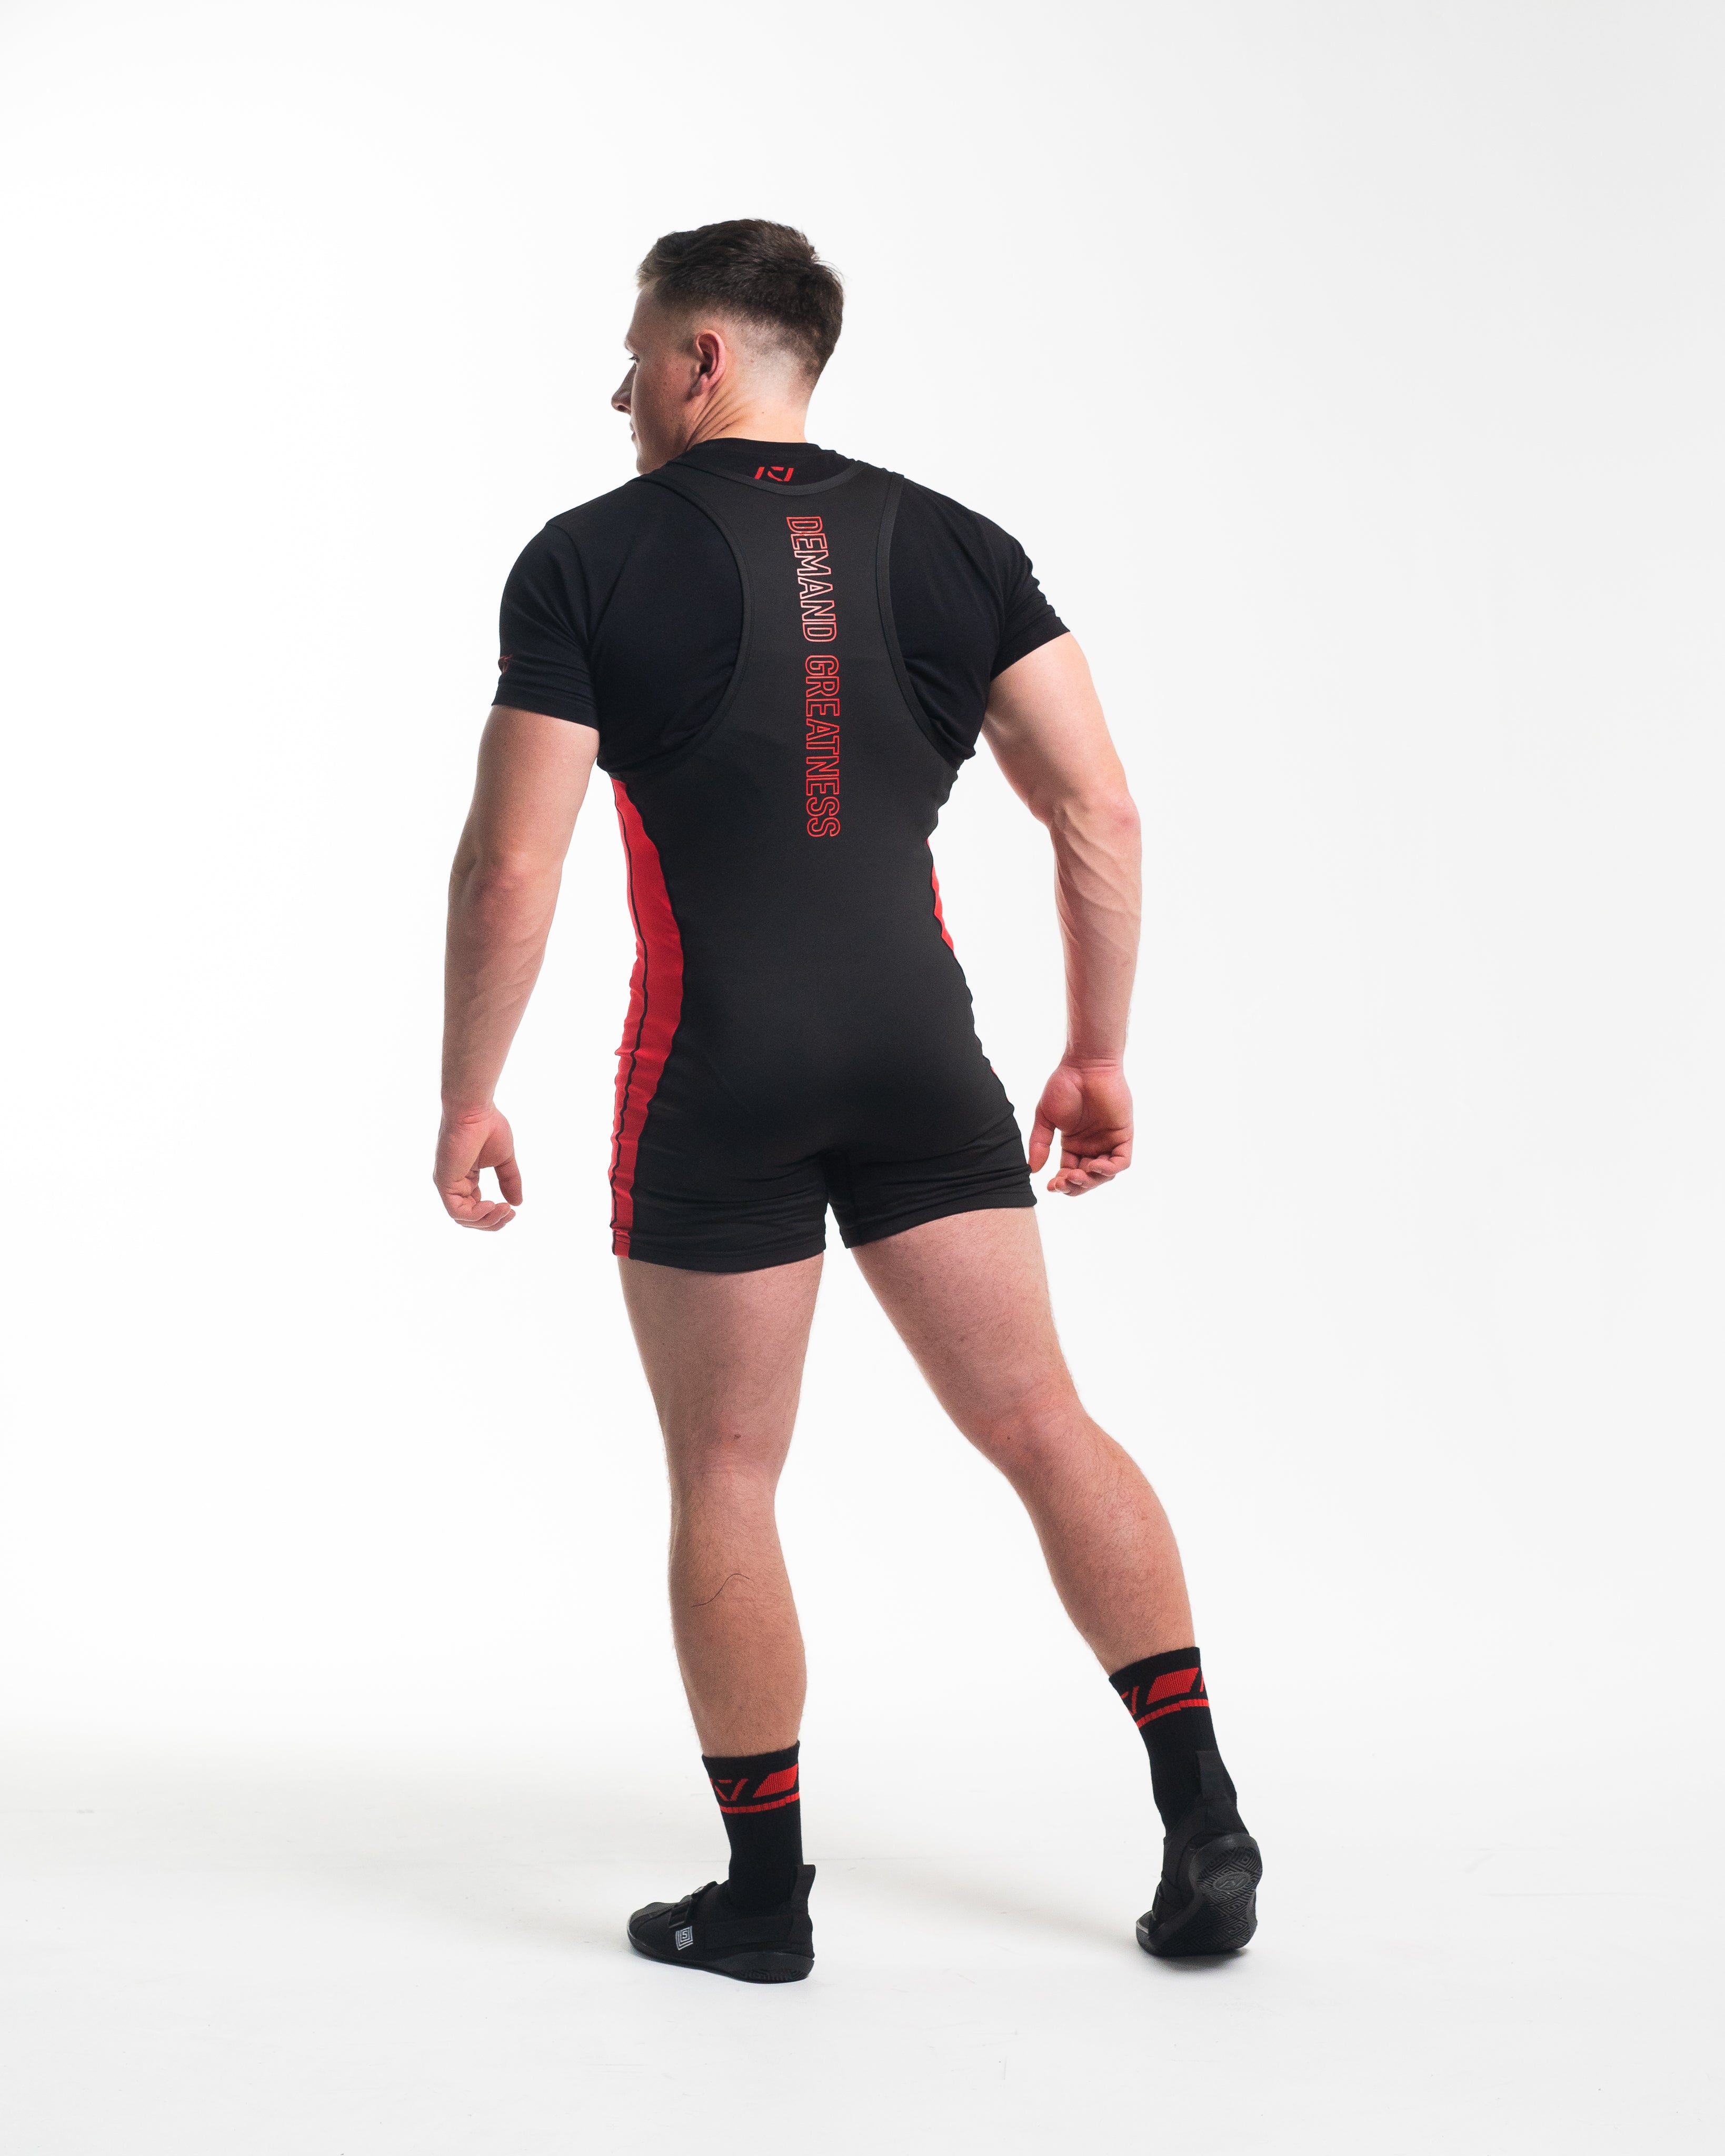 A7 Red Dawn Crew socks showcase dark grey logos to keep contrast at a minimum and let your energy show on the platform, in your training or while out and about. The IPF Approved Shadow Stone Meet Kit includes Powerlifting Singlet, A7 Meet Shirt, A7 Zebra Wrist Wraps, A7 Deadlift Socks, Hourglass Knee Sleeves (Stiff Knee Sleeves and Rigor Mortis Knee Sleeves). Genouillères powerlifting shipping to France, Spain, Ireland, Germany, Italy, Sweden and EU.